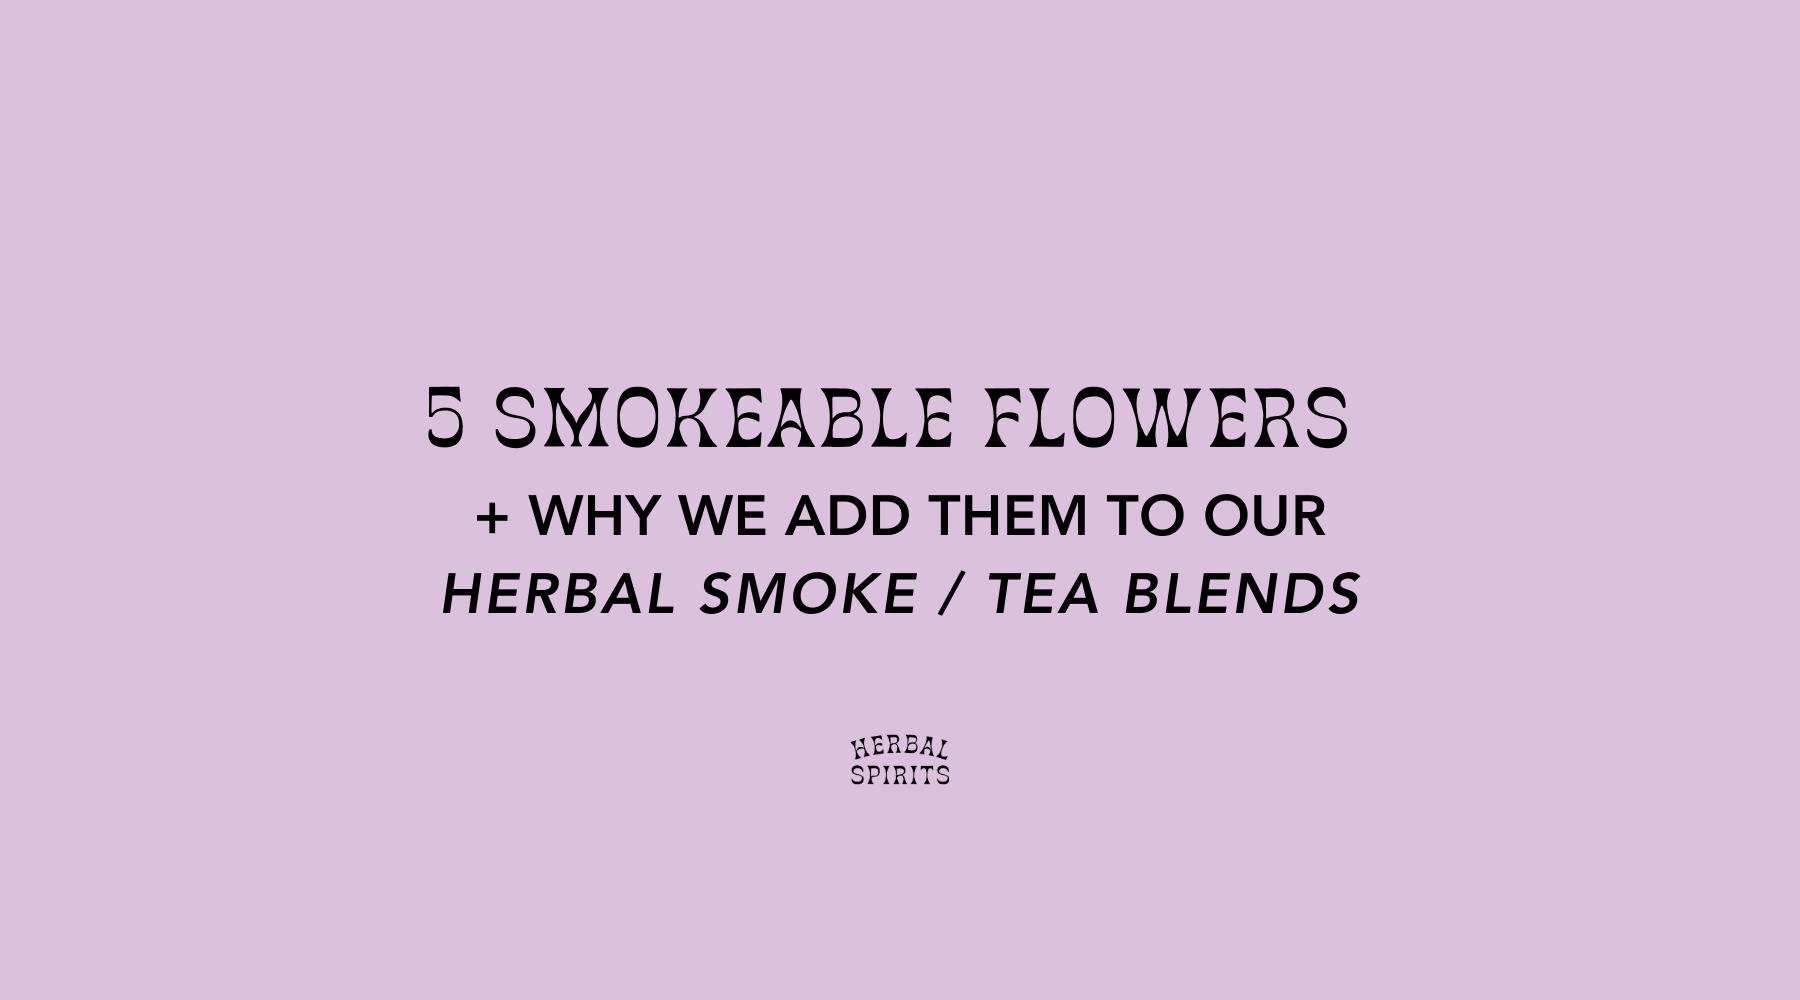 5 Smokeable Flowers + Why We Add Them To Our Herbal Smoke/Tea Blends